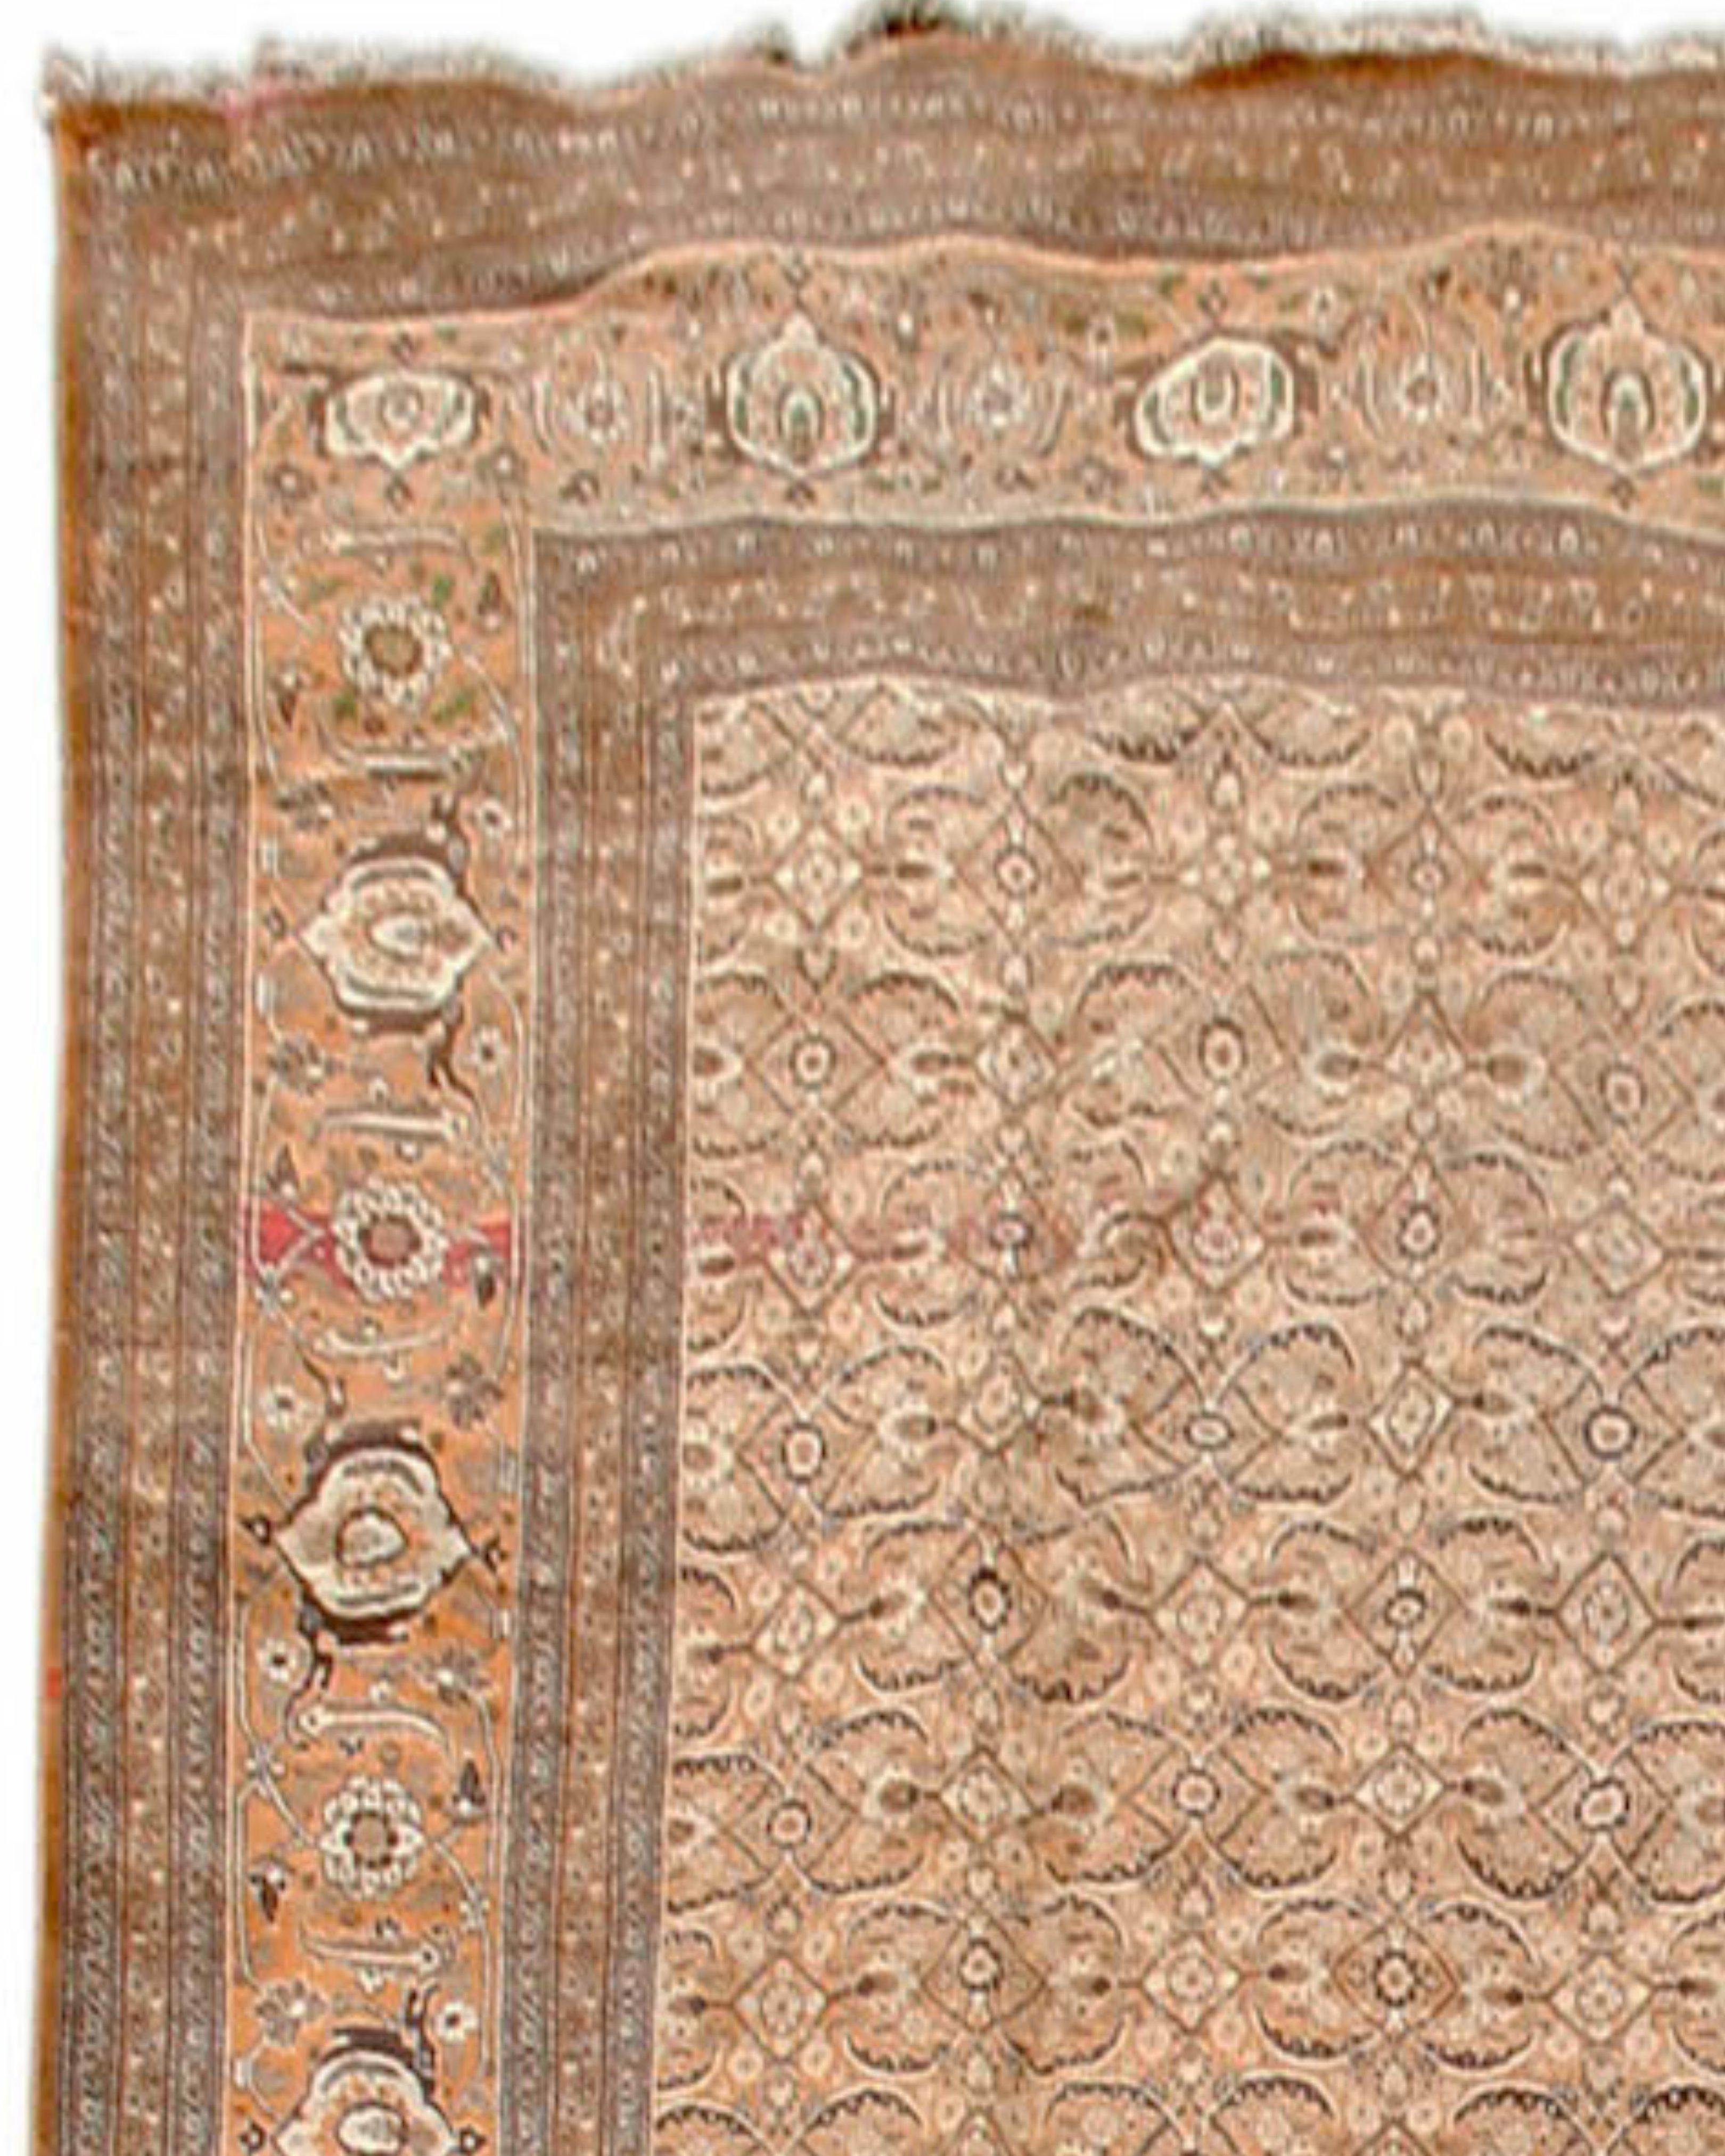 Antique Large Persian Tabriz Rug, 19th Century

This magnificent over-sized Tabriz carpet paints an overall field using the so-called Herati pattern. Delicate feather-shaped palm fronds extend horizontally in a lattice grid with rosette centers. The